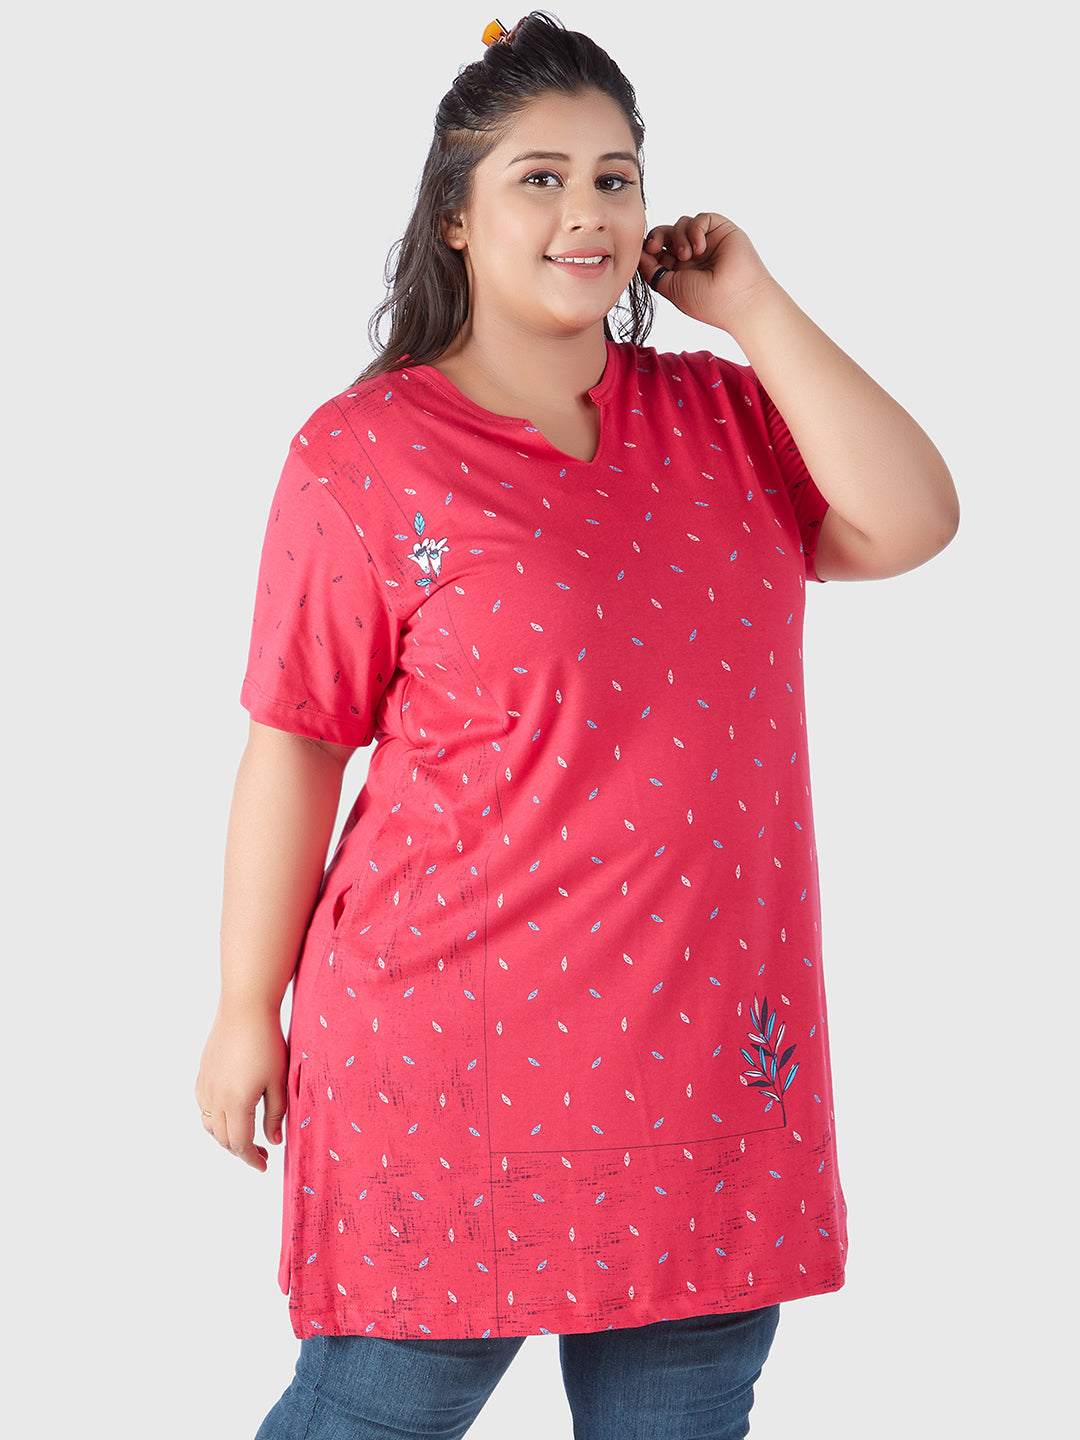 Stylish Pink Plus Size Printed Cotton Long Top(Half Sleeves) For Women online in India